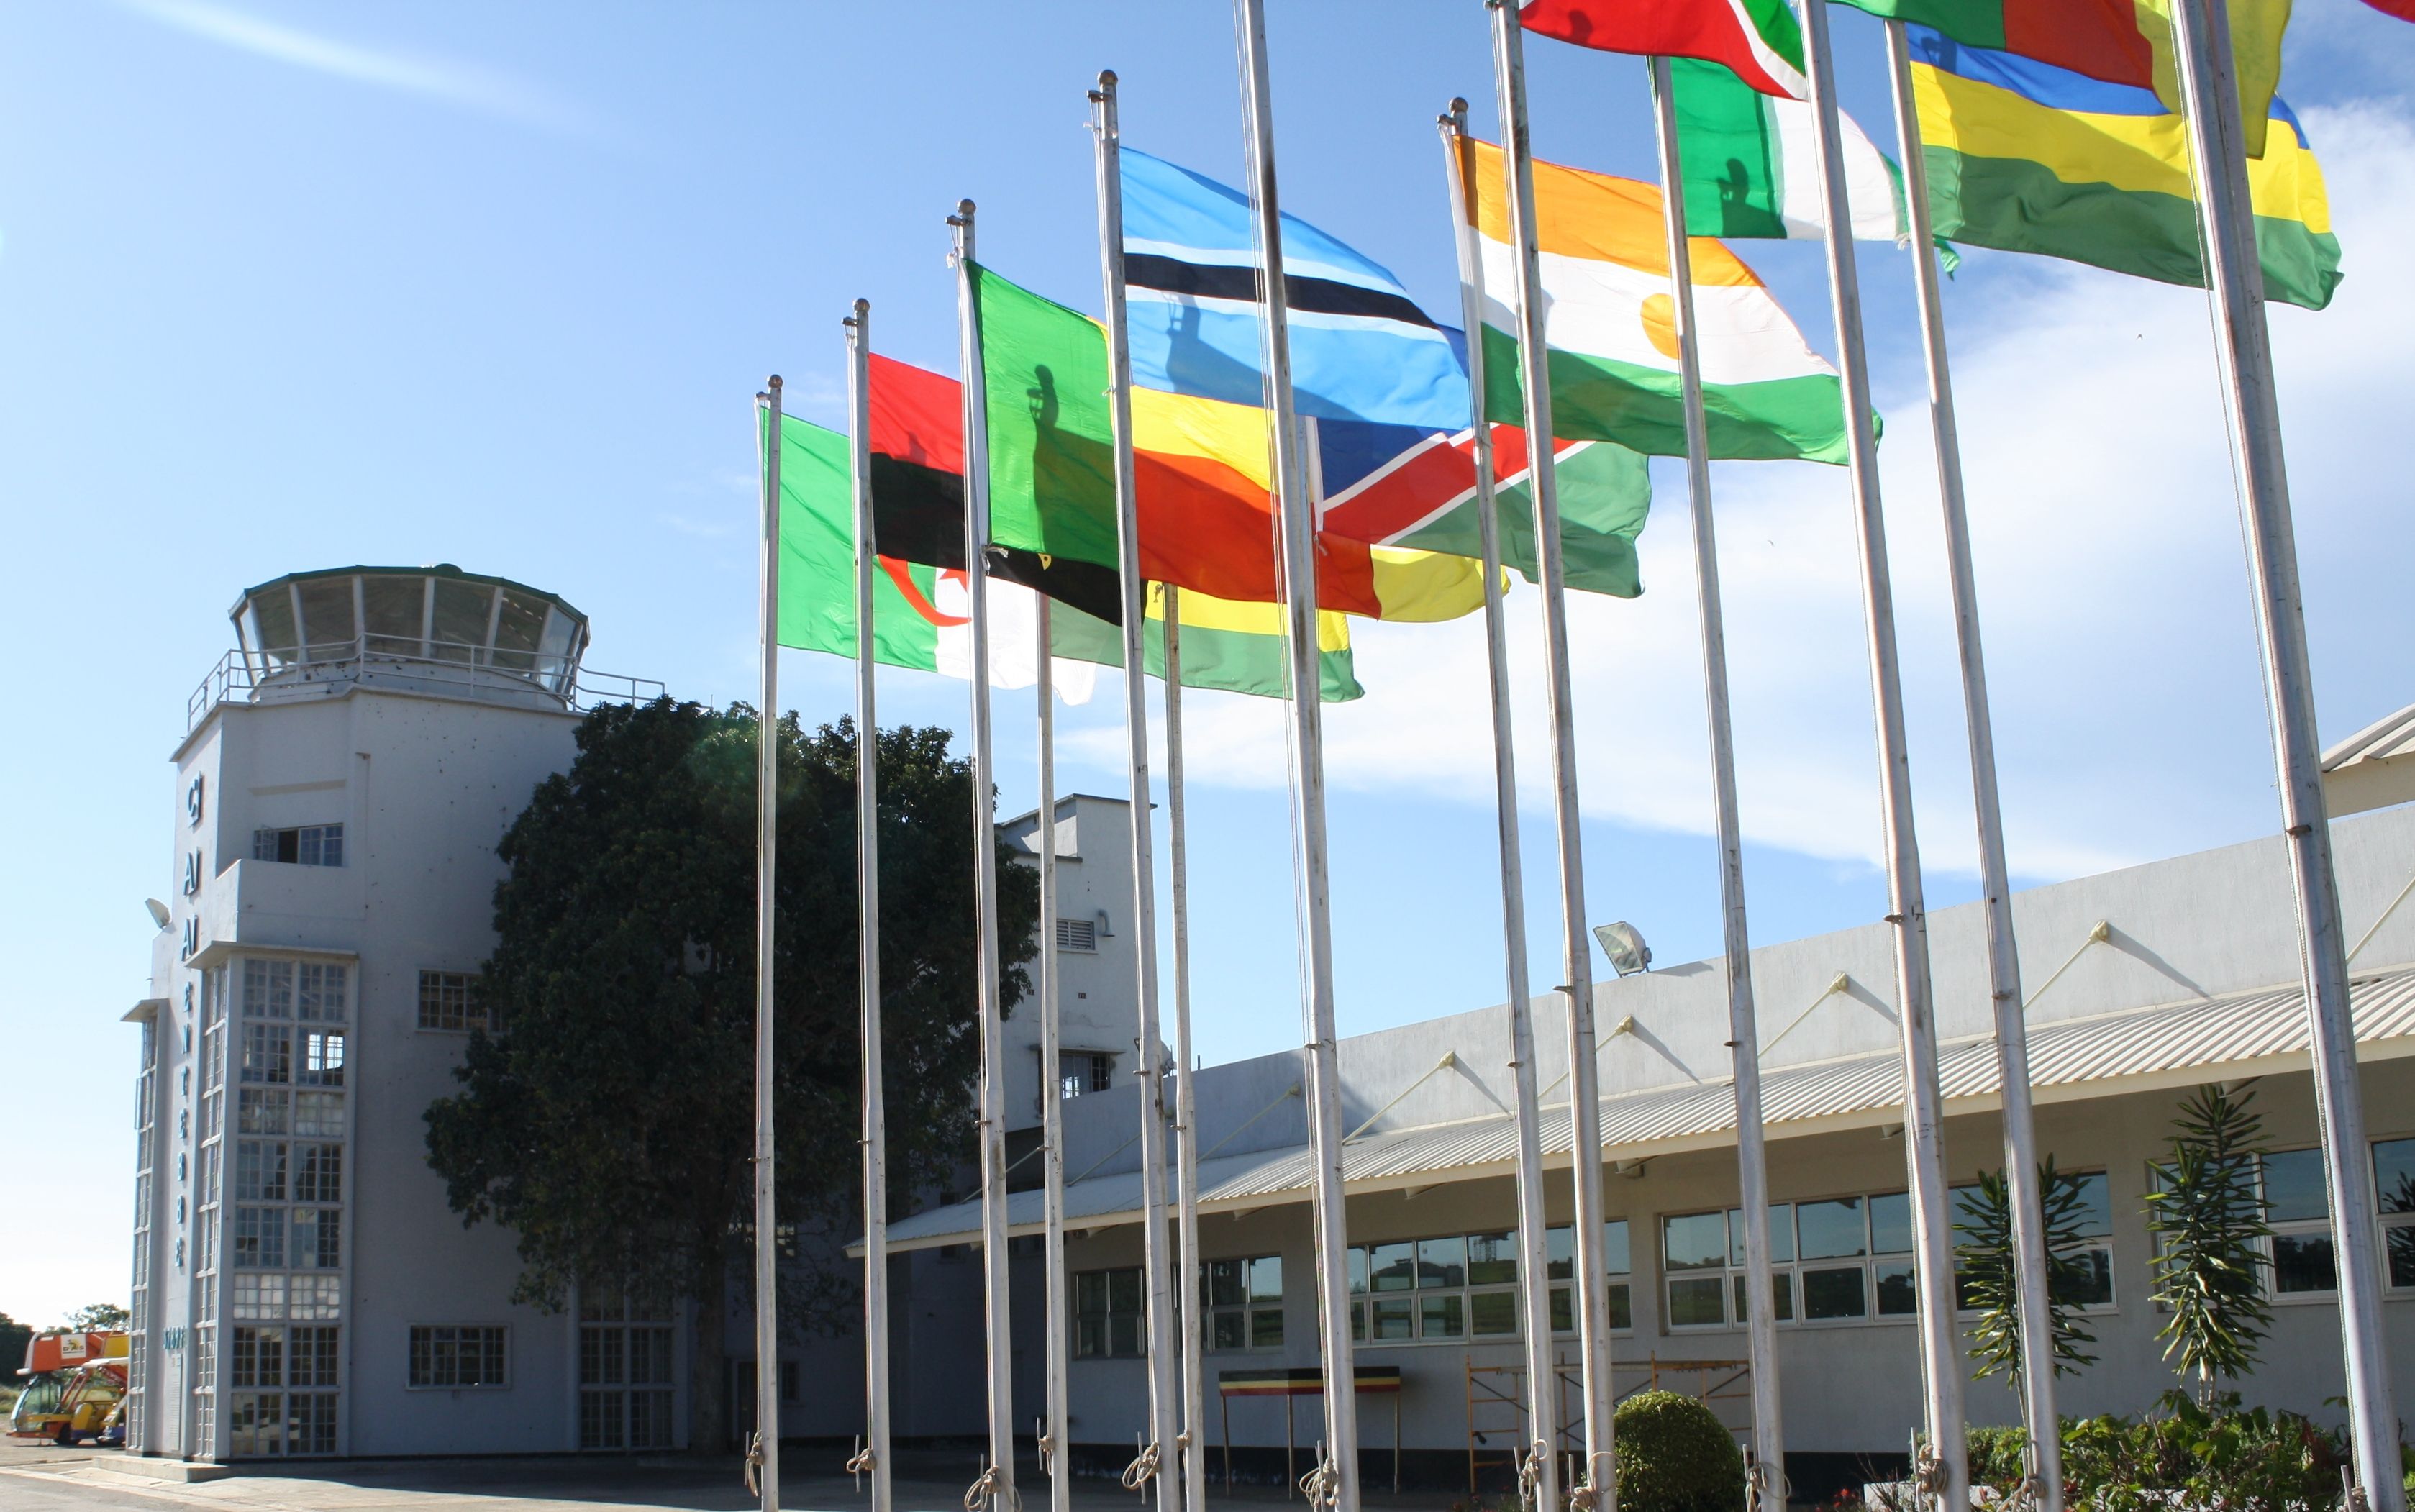 Terminal at Entebbe International with flags of African nations